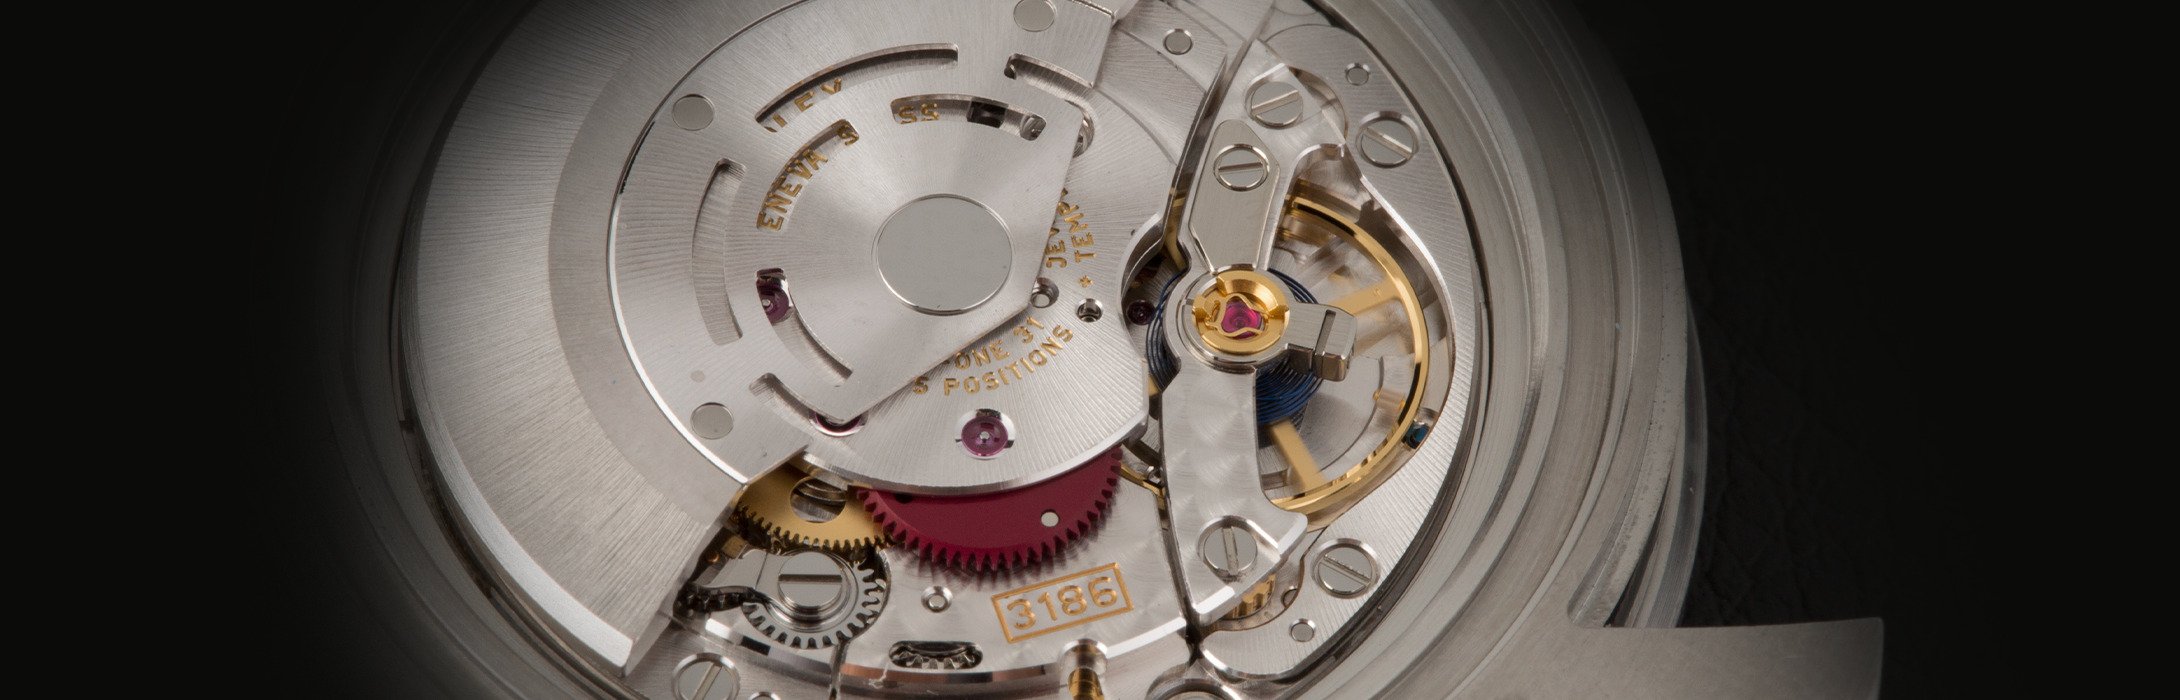 Luxury watches require services